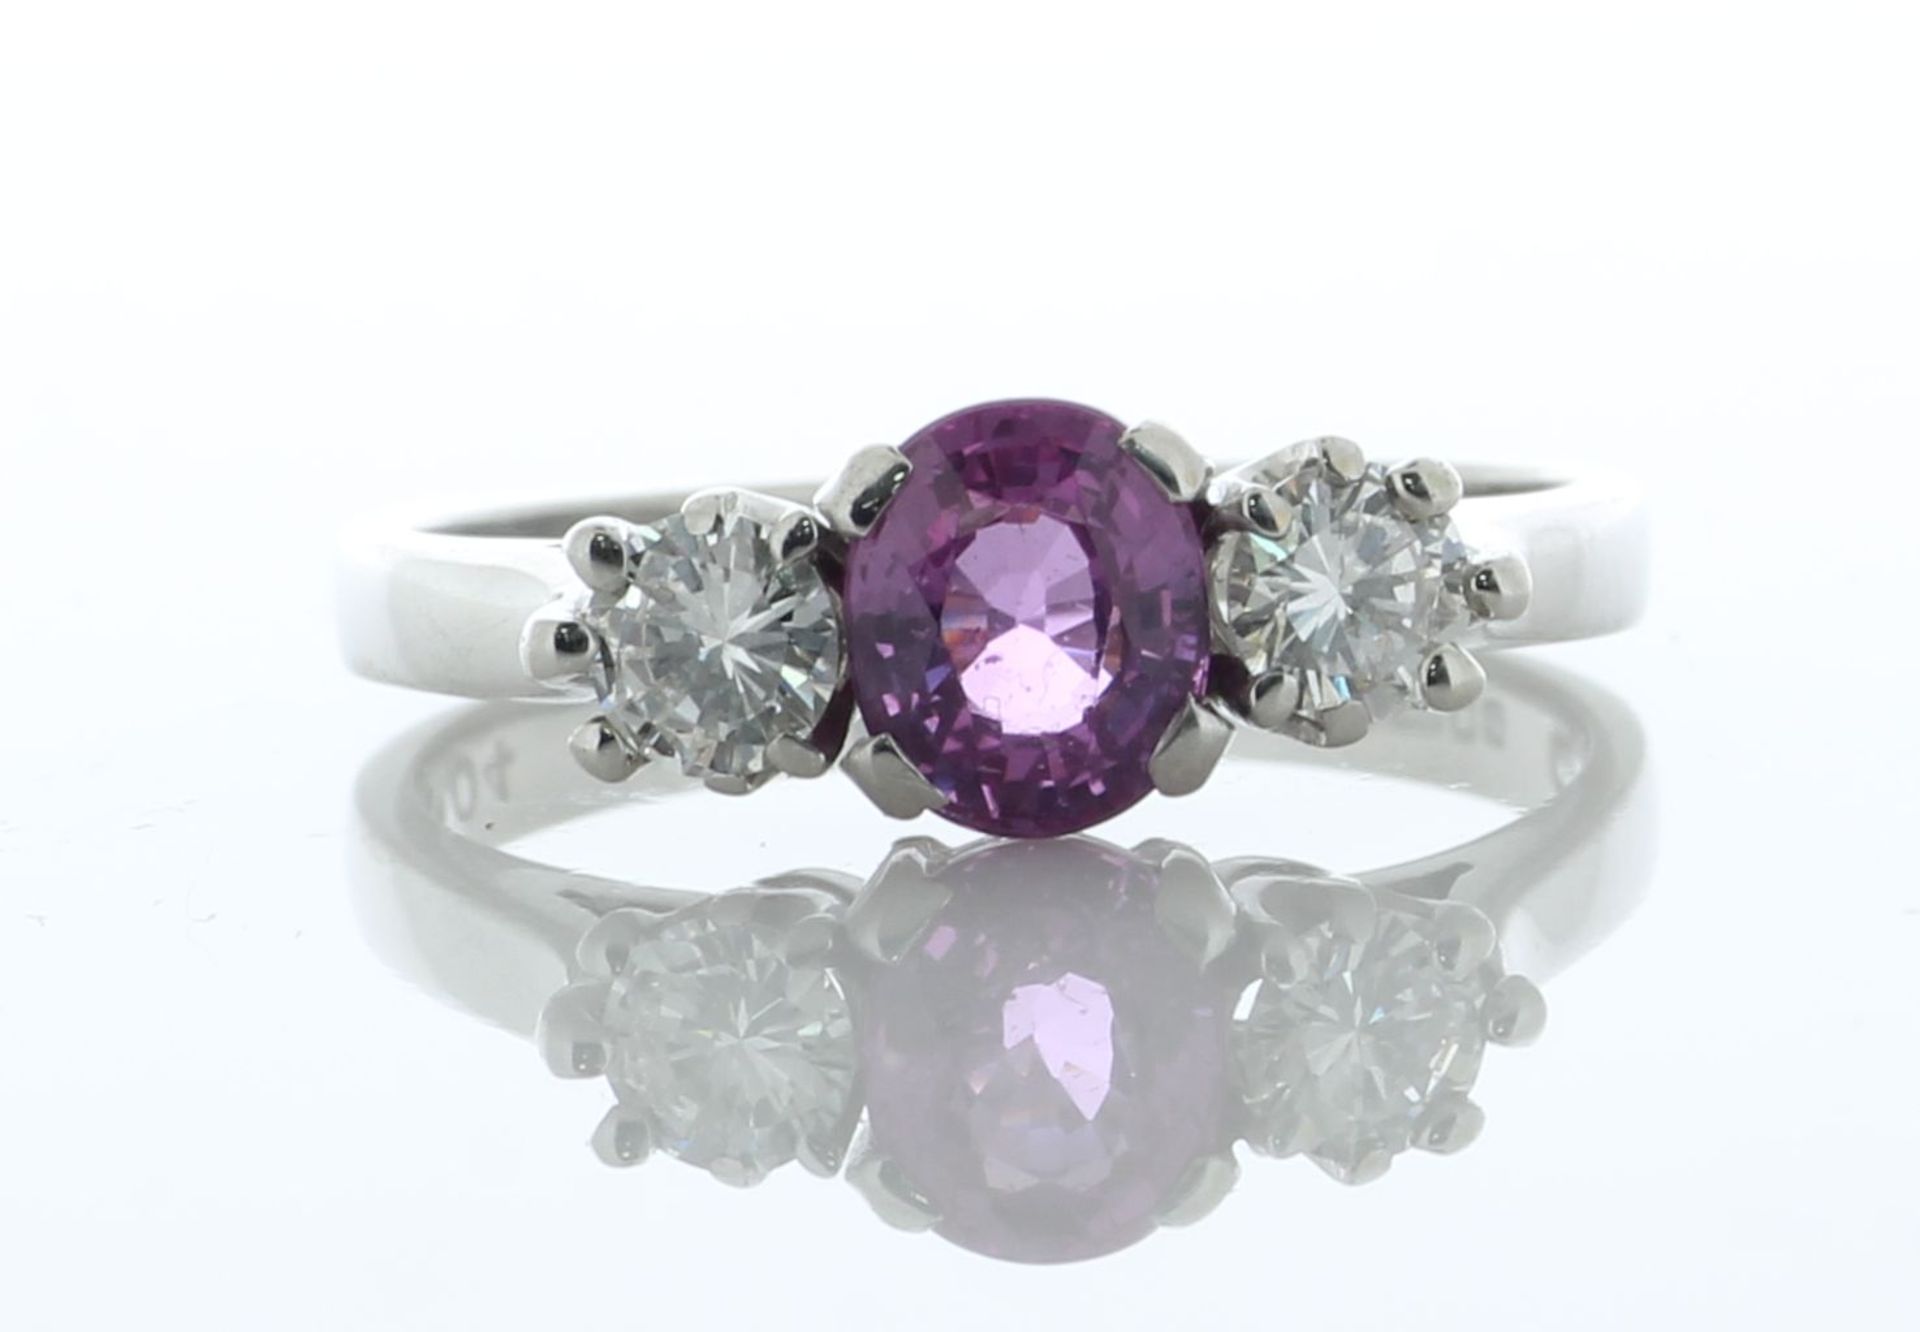 18ct White Gold Three Stone Diamond And Pink Sapphire Ring (PS1.04) 0.40 Carats - Valued By AGI £3,